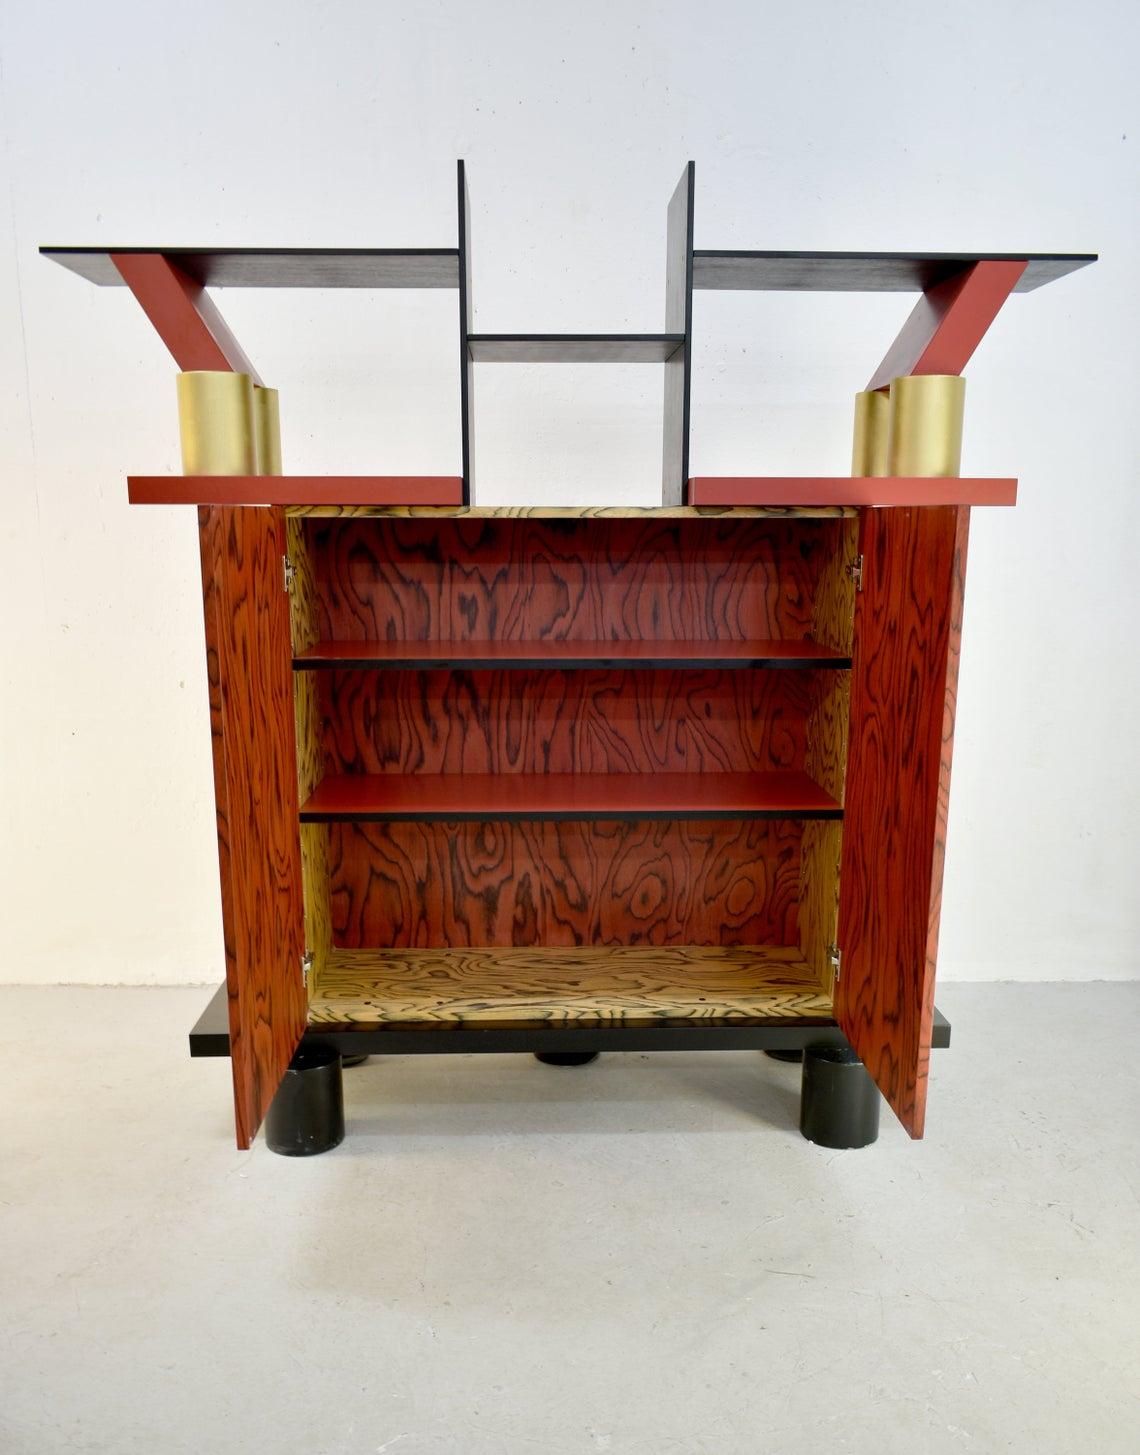 Freemont cabinet, an iconic postmodern design by Ettore Sottsass for Memphis Milano

Designed in 1985, wood, plastic laminate, aluminium, and gilded wood console.

With manufacturer's metal label printed with MEMPHIS/MILANO/ETTORE